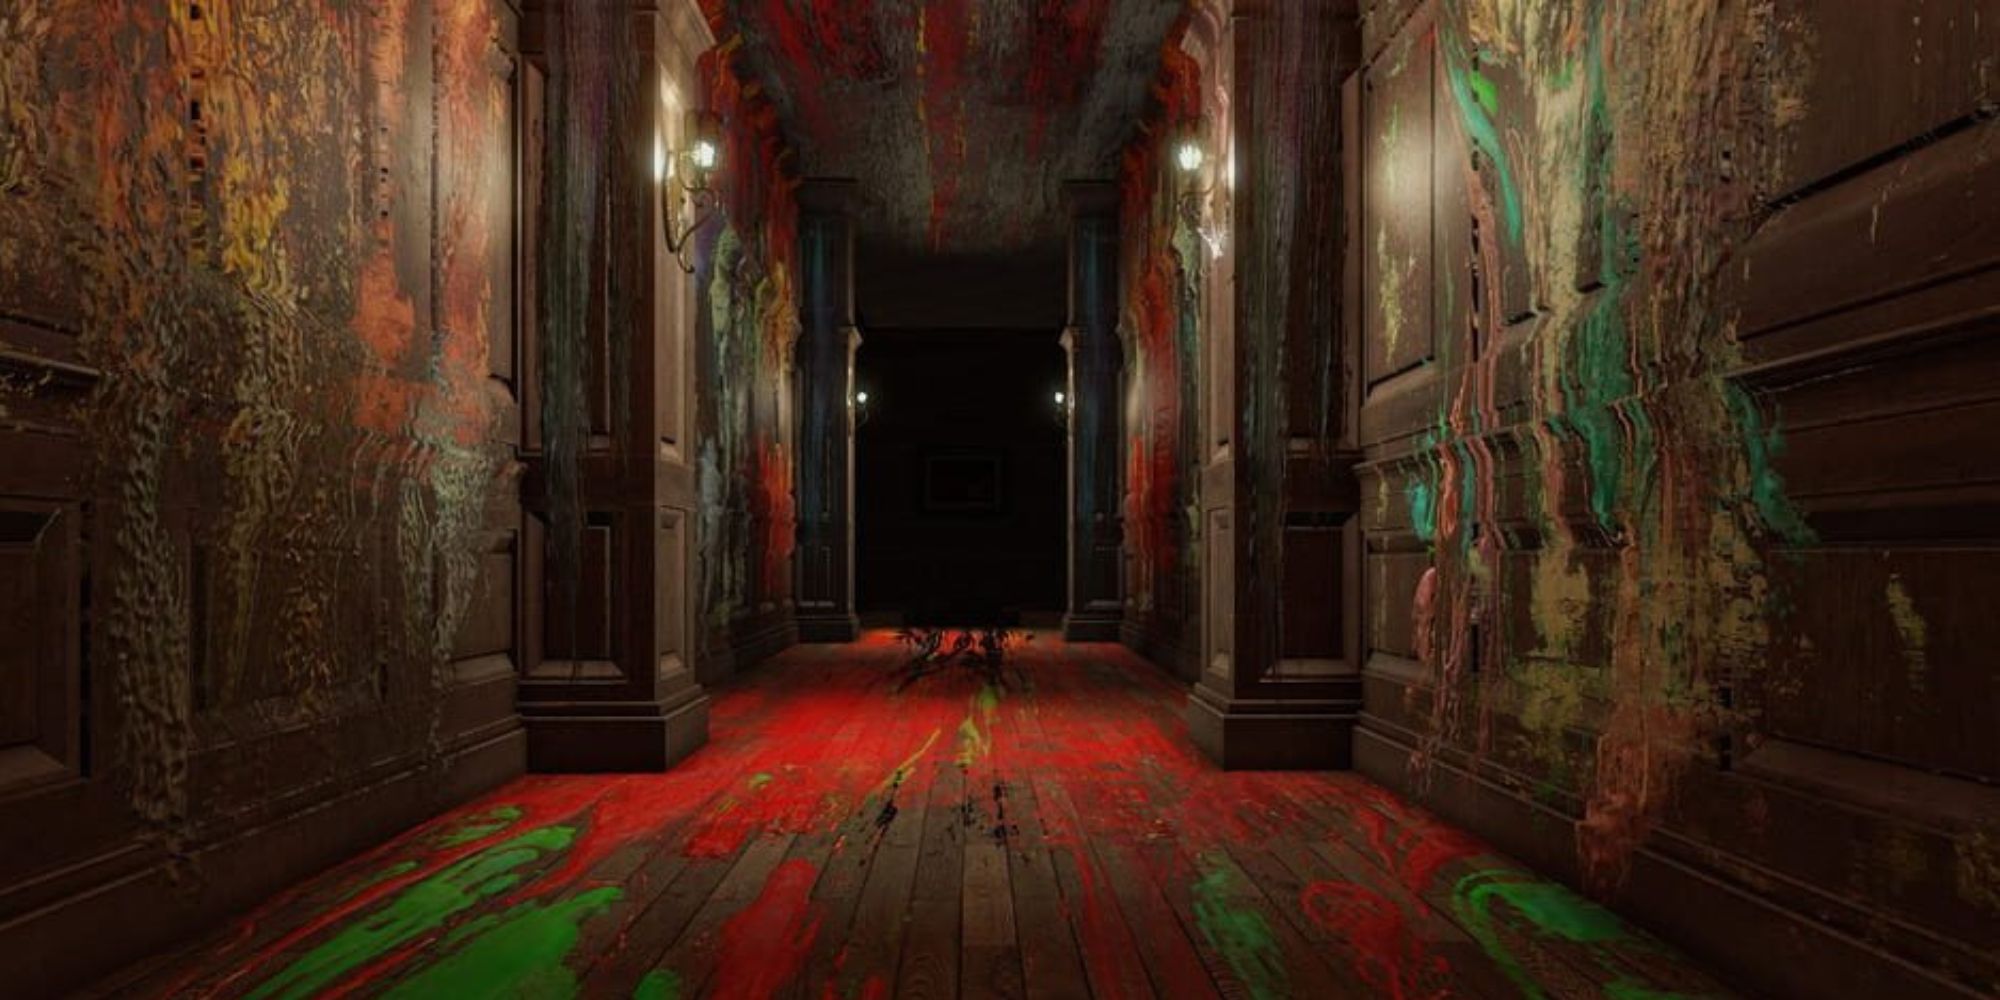 A wooden hallway stretches down into a dark room, with different colors of paint splattered all over the floor and walls